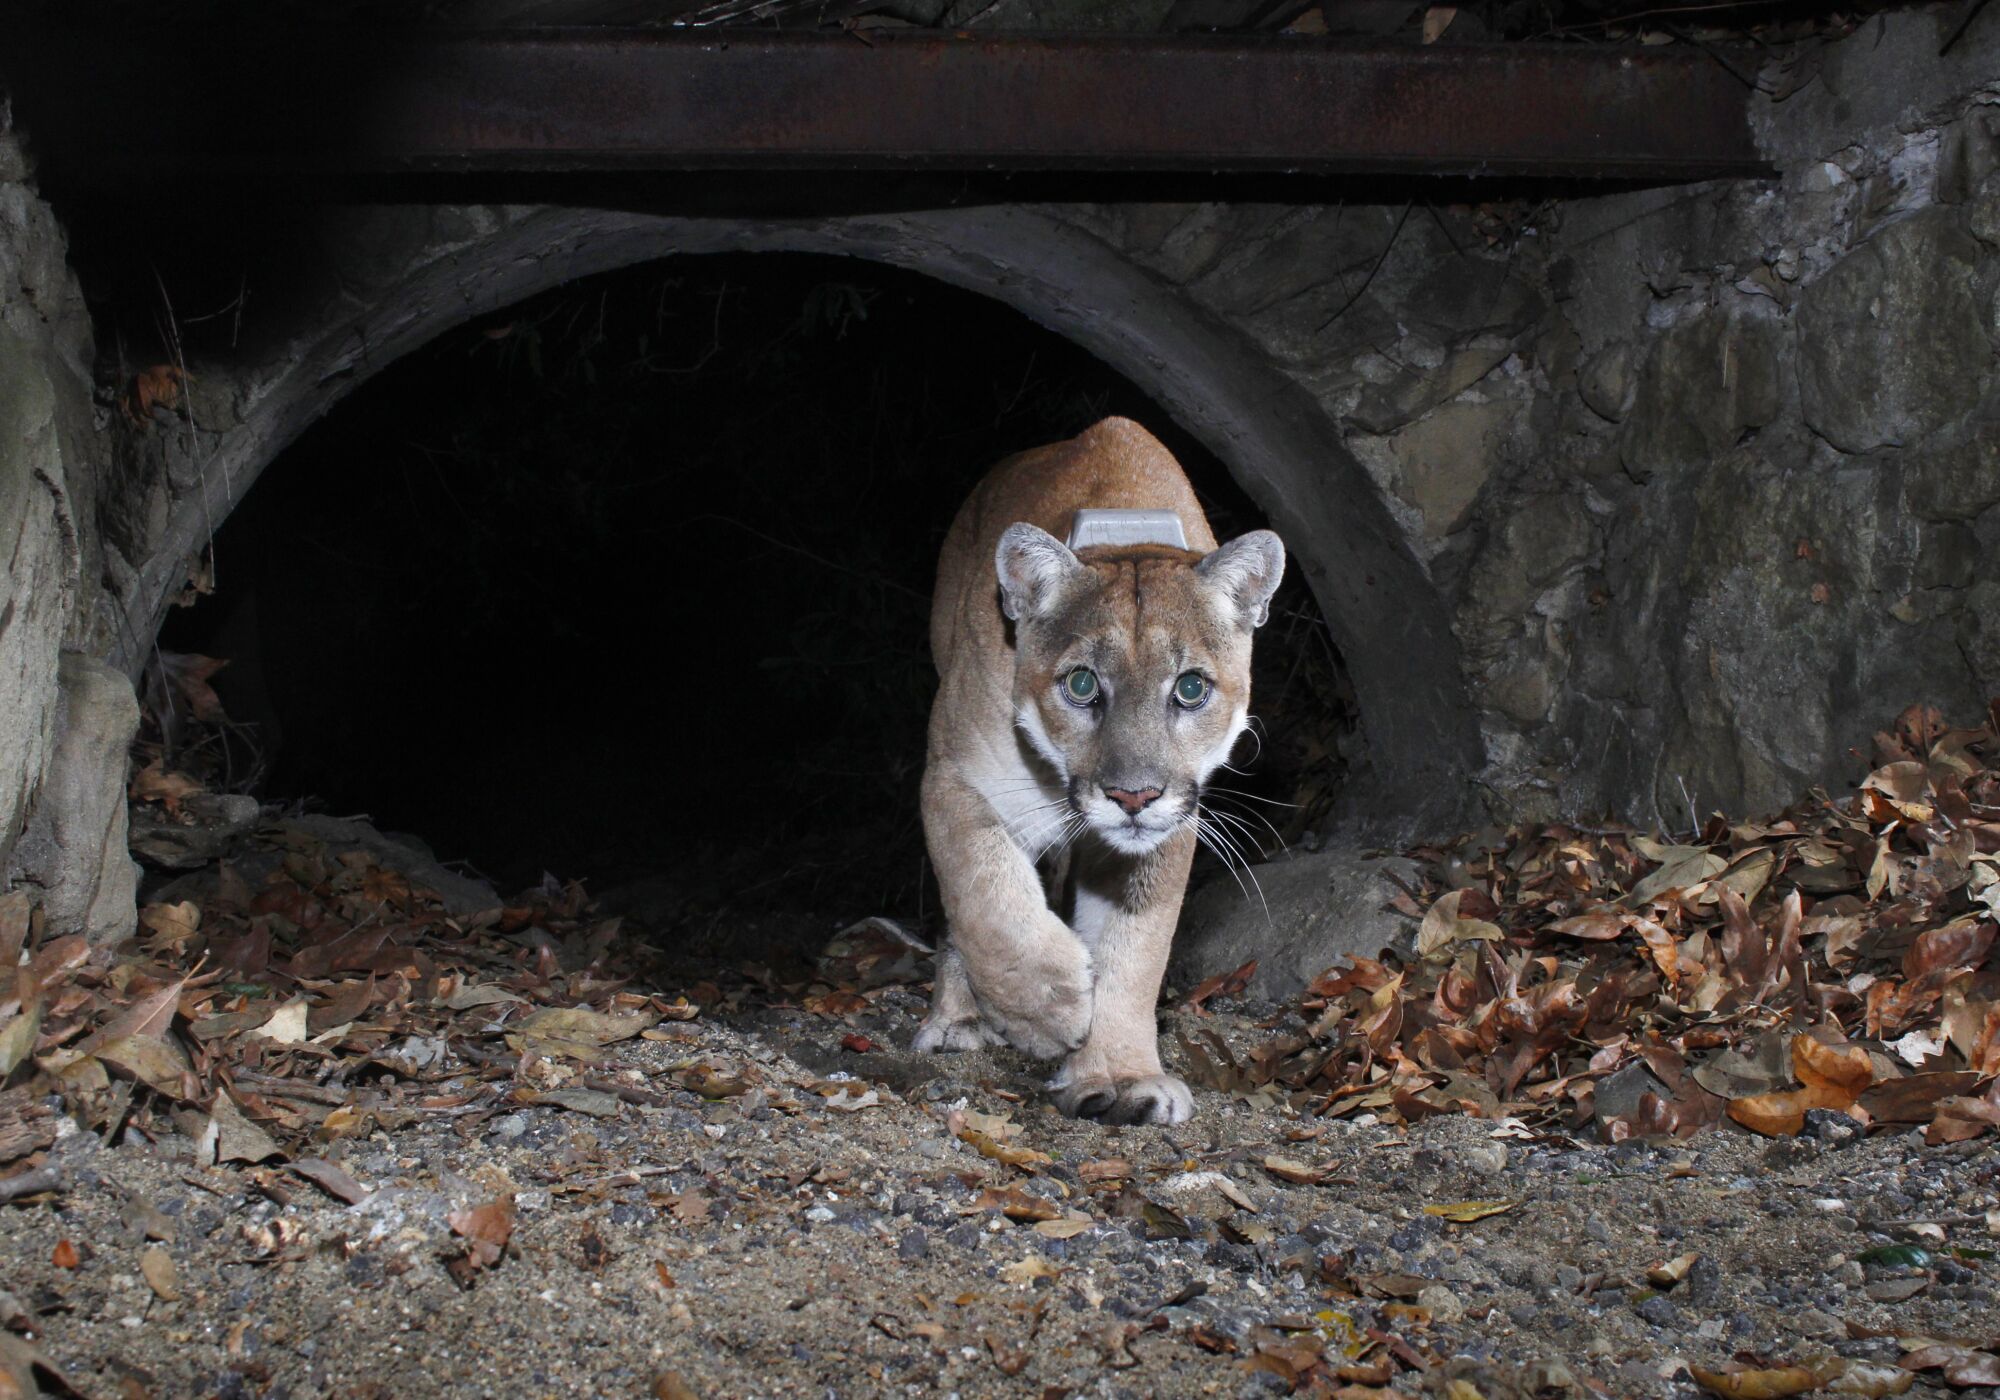 P-22 walks out of a tunnel or storm drain at night in Griffith Park.